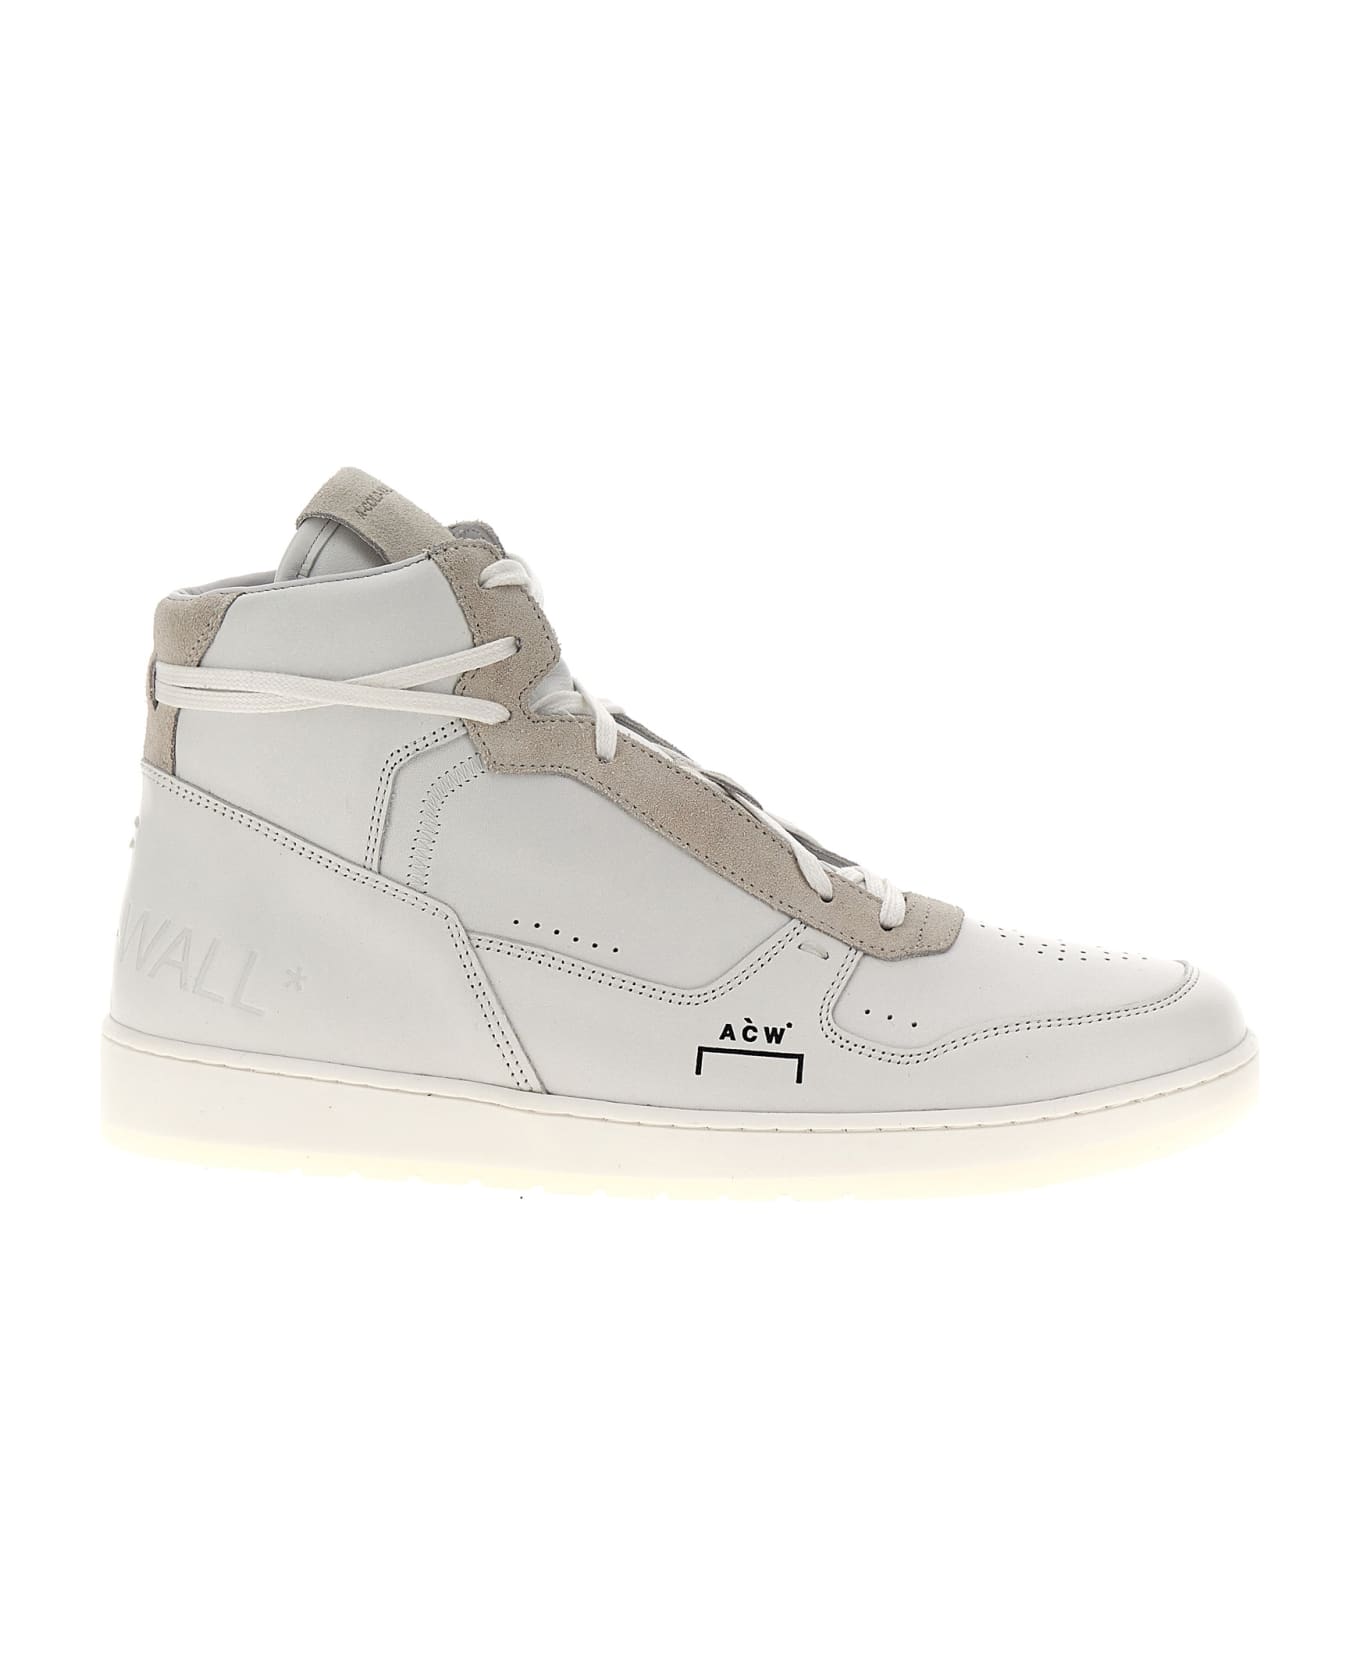 A-COLD-WALL 'luol Hi Top' Sneakers - White スニーカー